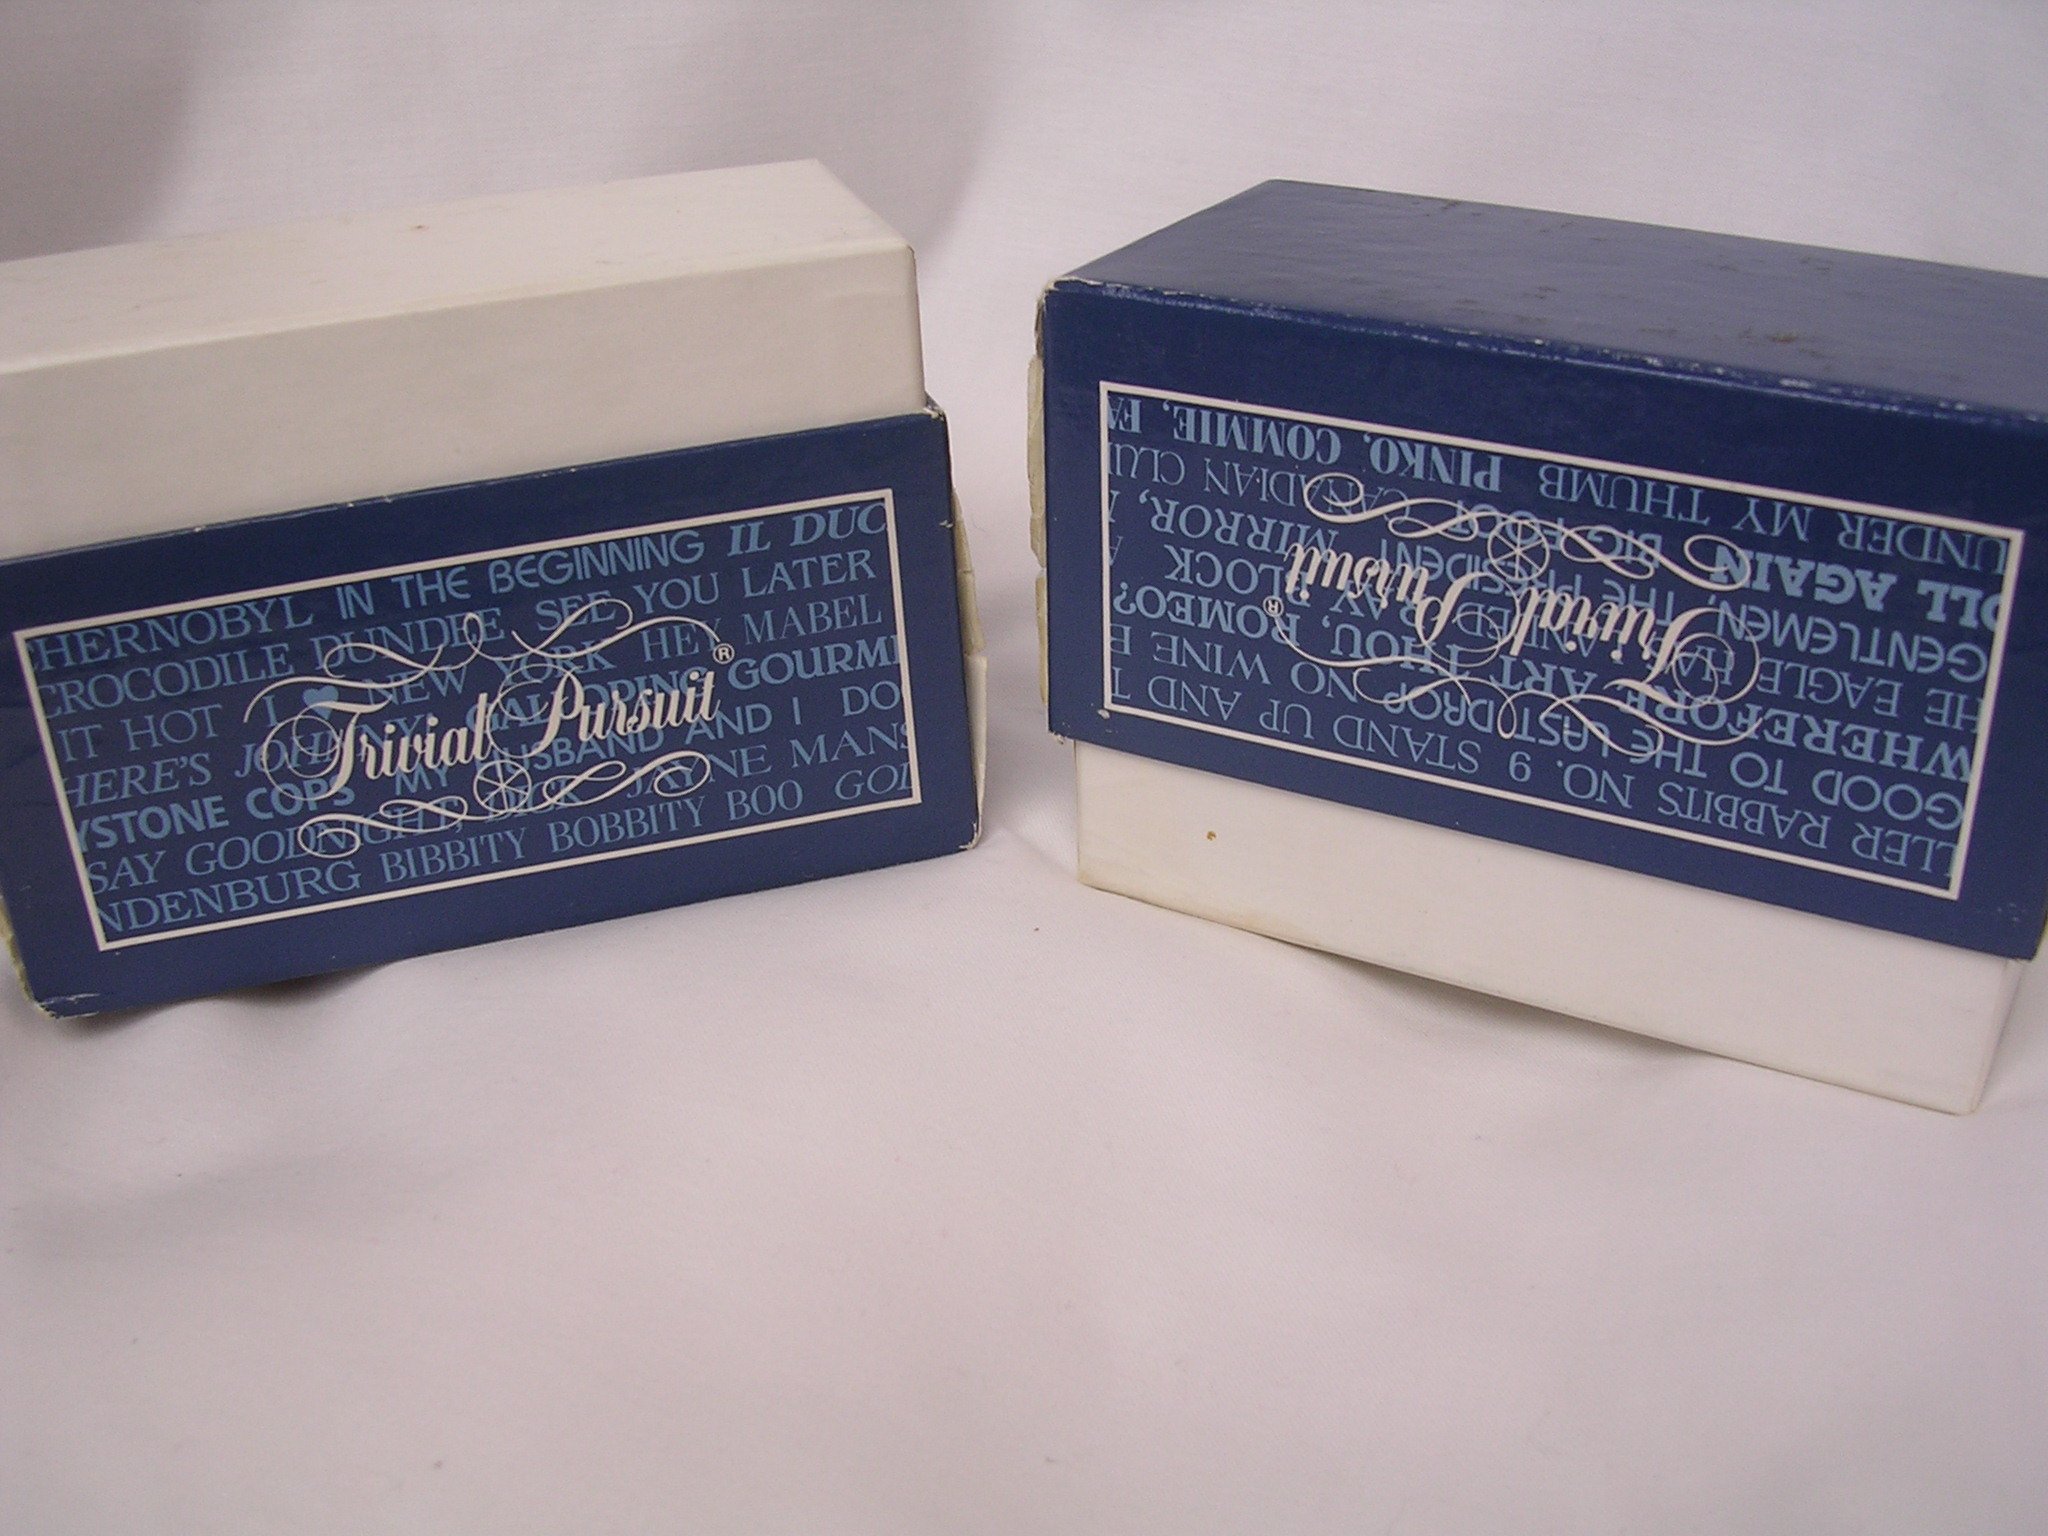 Trivial Pursuit Volume II Subsidiary Card Set ; 2 Card Boxes for use with the Master Game